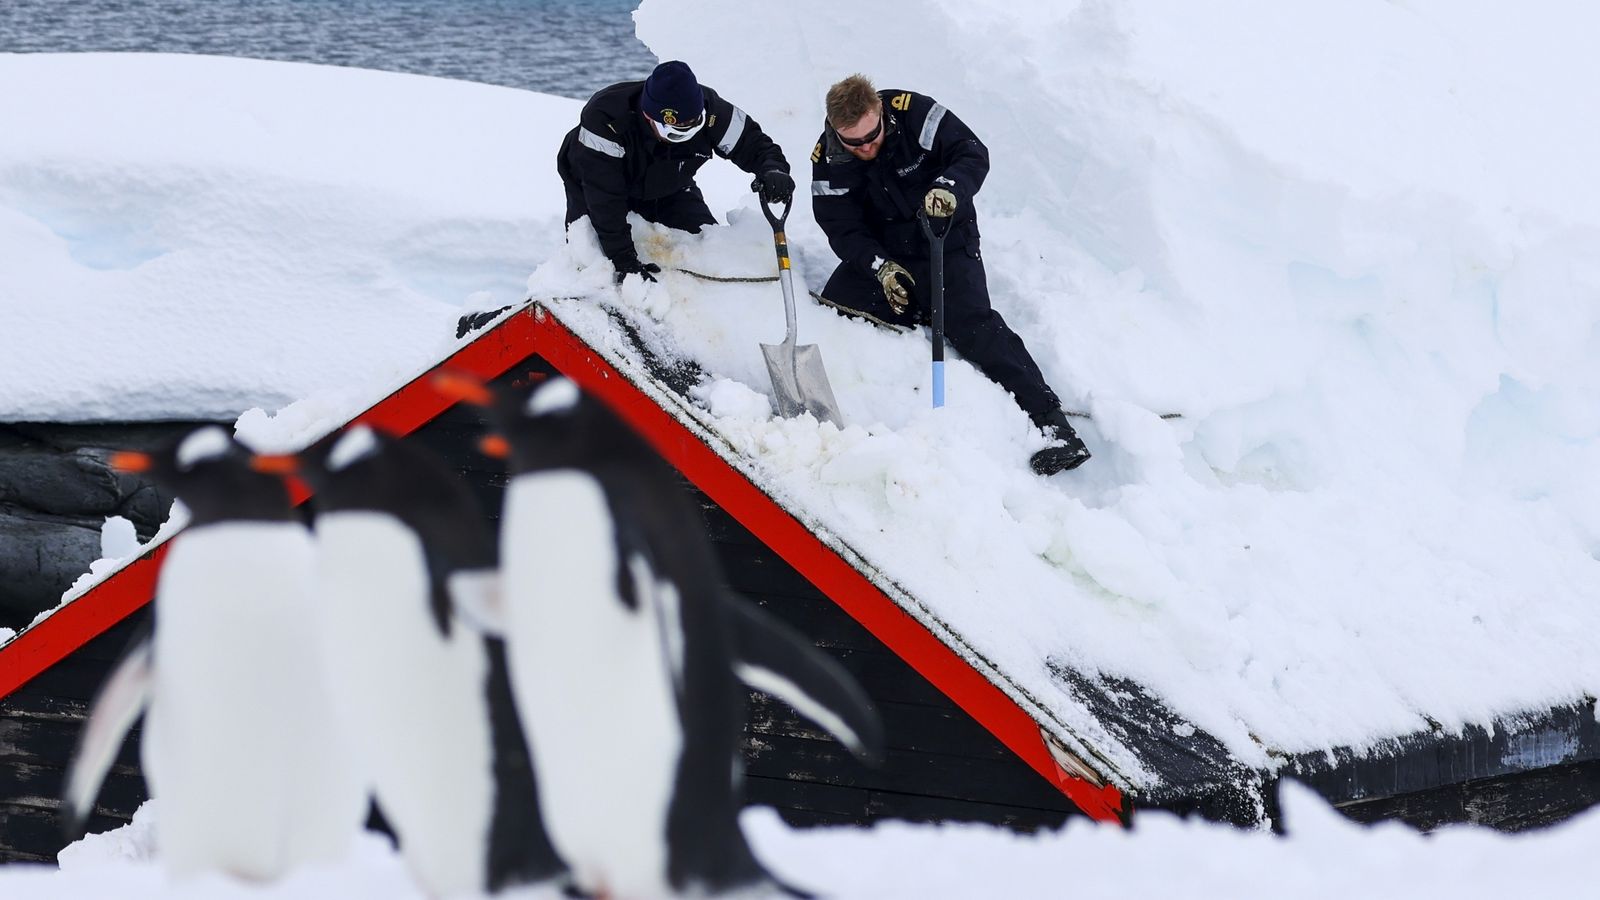 Royal Navy helps dig out world's most remote post office in Antarctic after 4m deluge of snow 